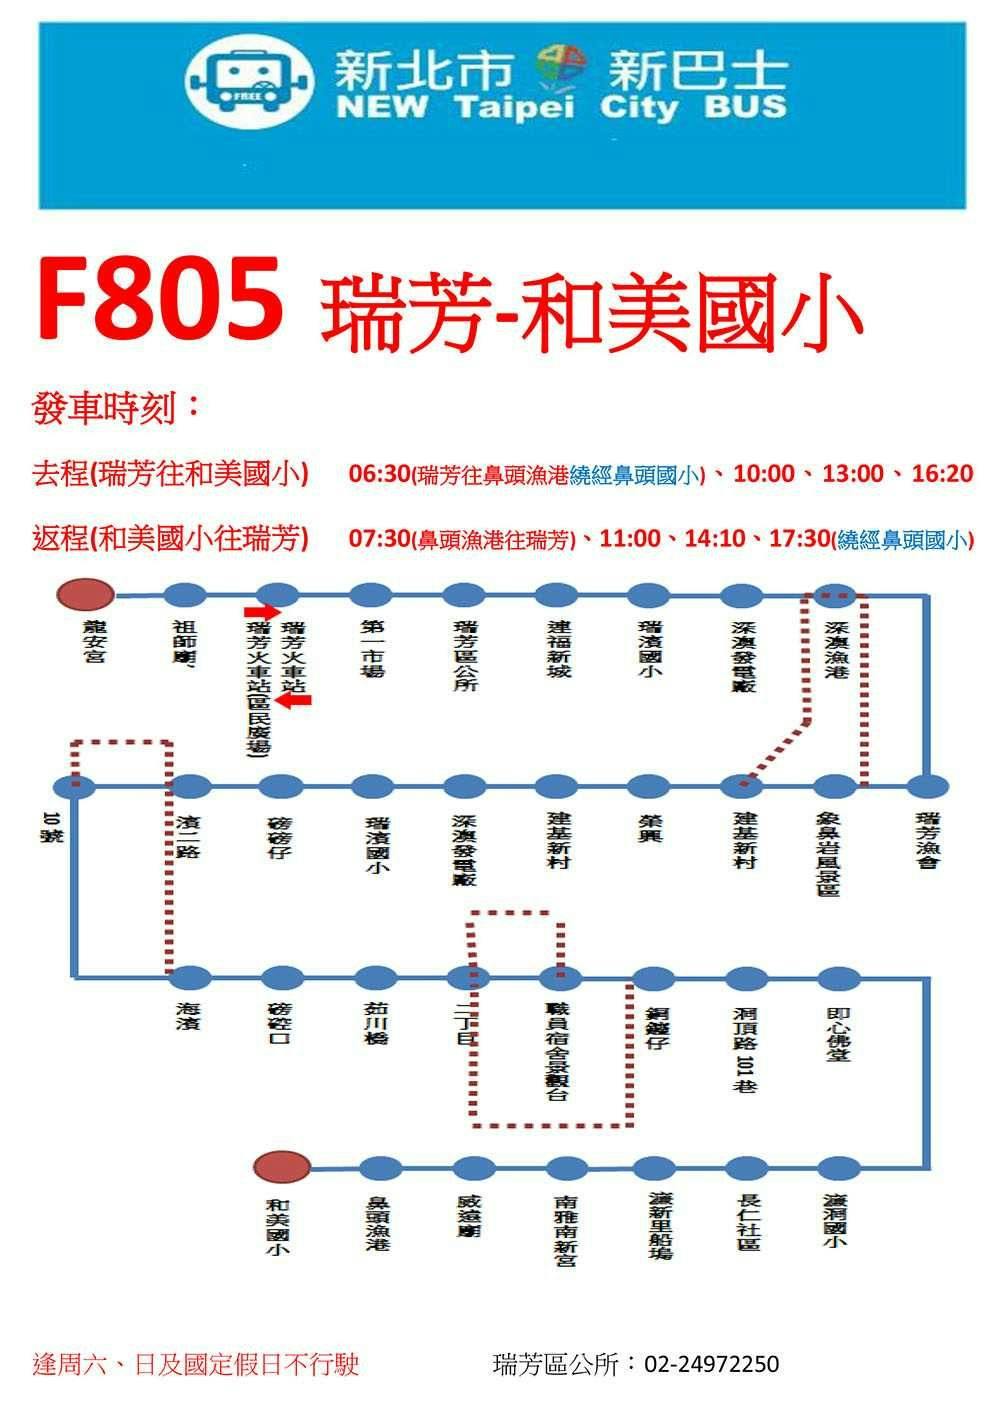 F805Route Map-新北市 Bus